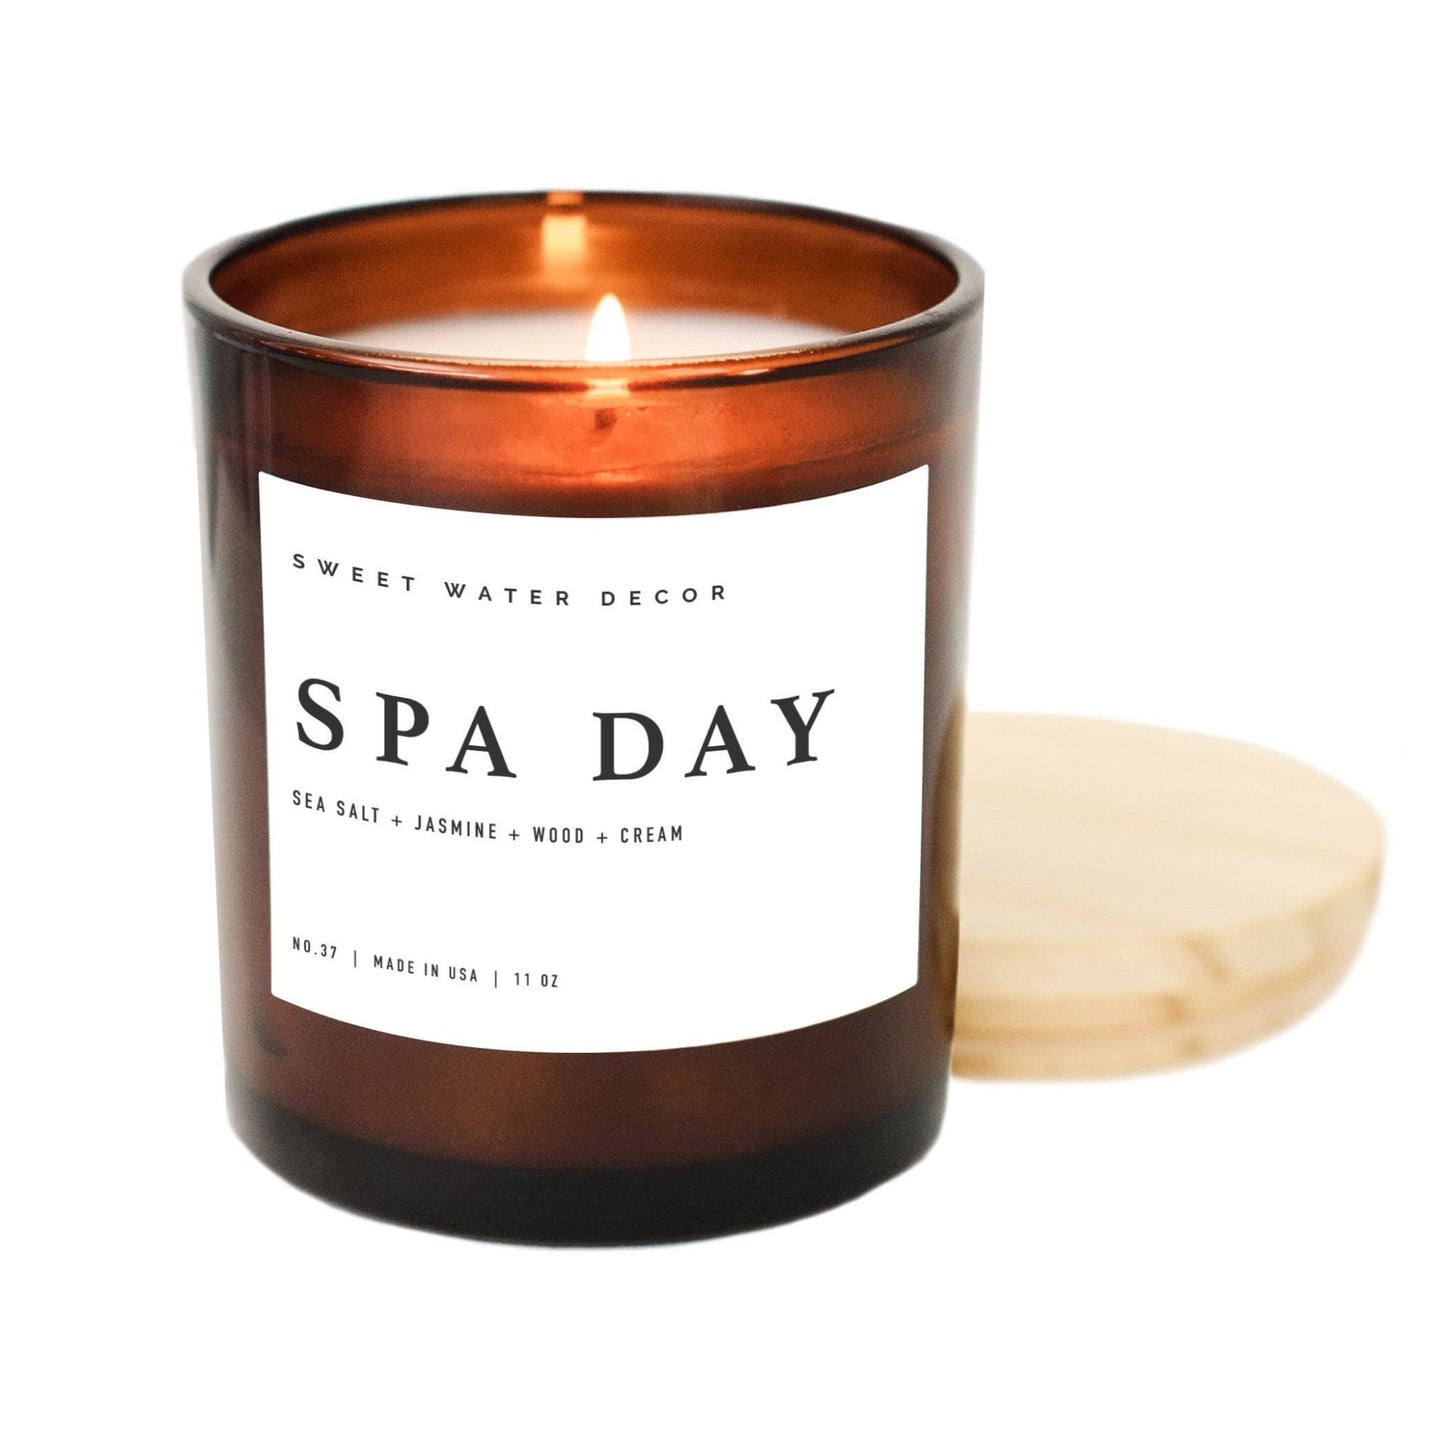 Spa Day 11 oz Soy Candle - Home Decor & Gifts - PaperGeenius